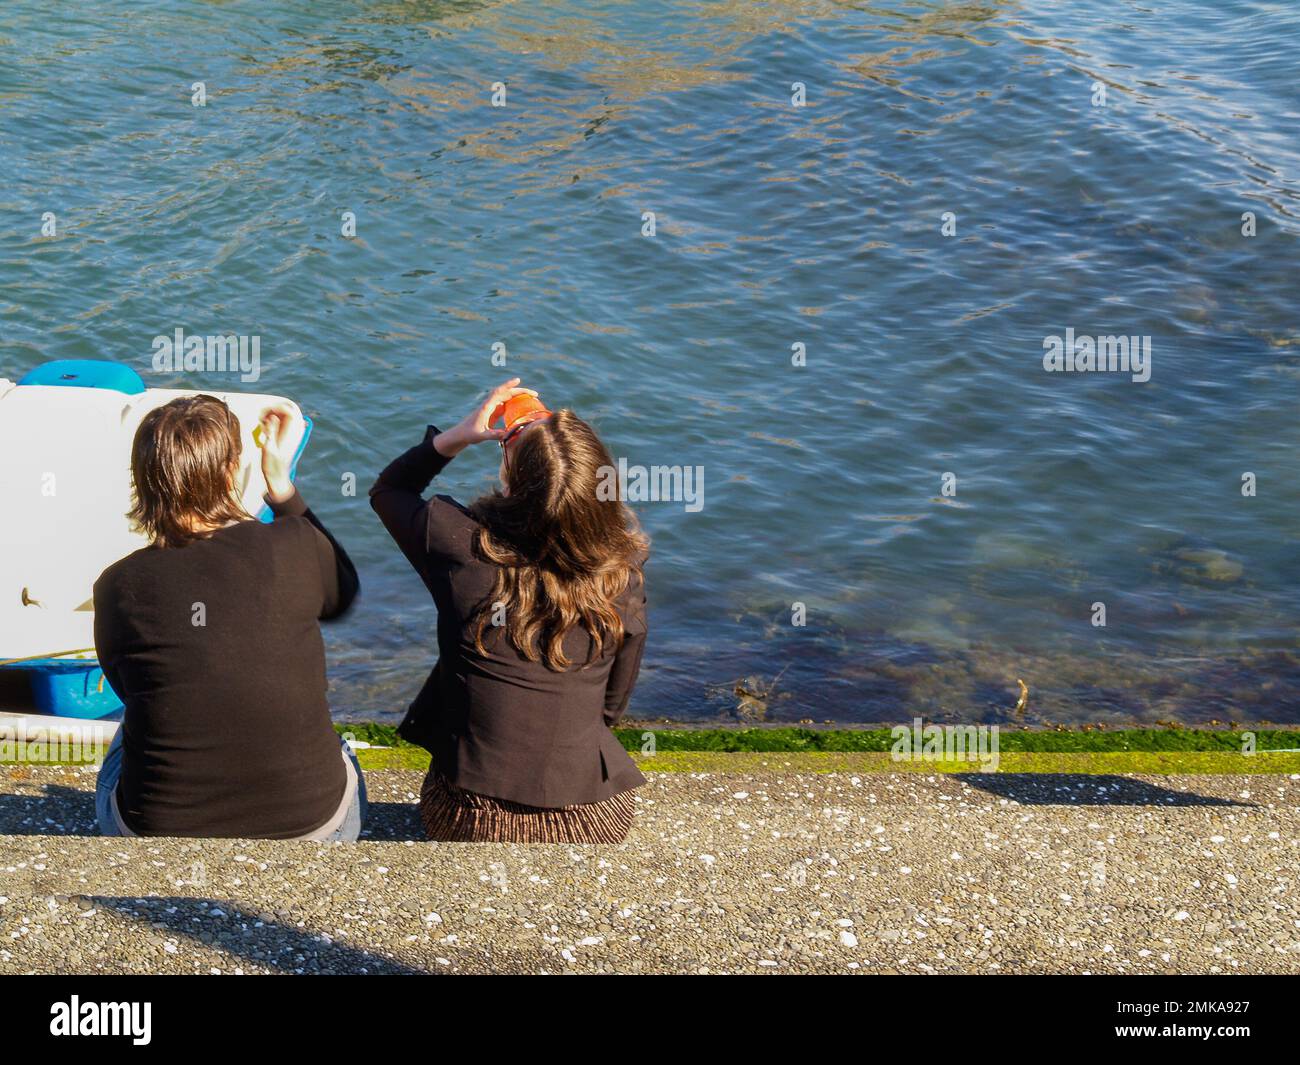 Wellington New Zealand - October 2 2010; Two young women sitting at edge of bay drinking on sunny day. Stock Photo